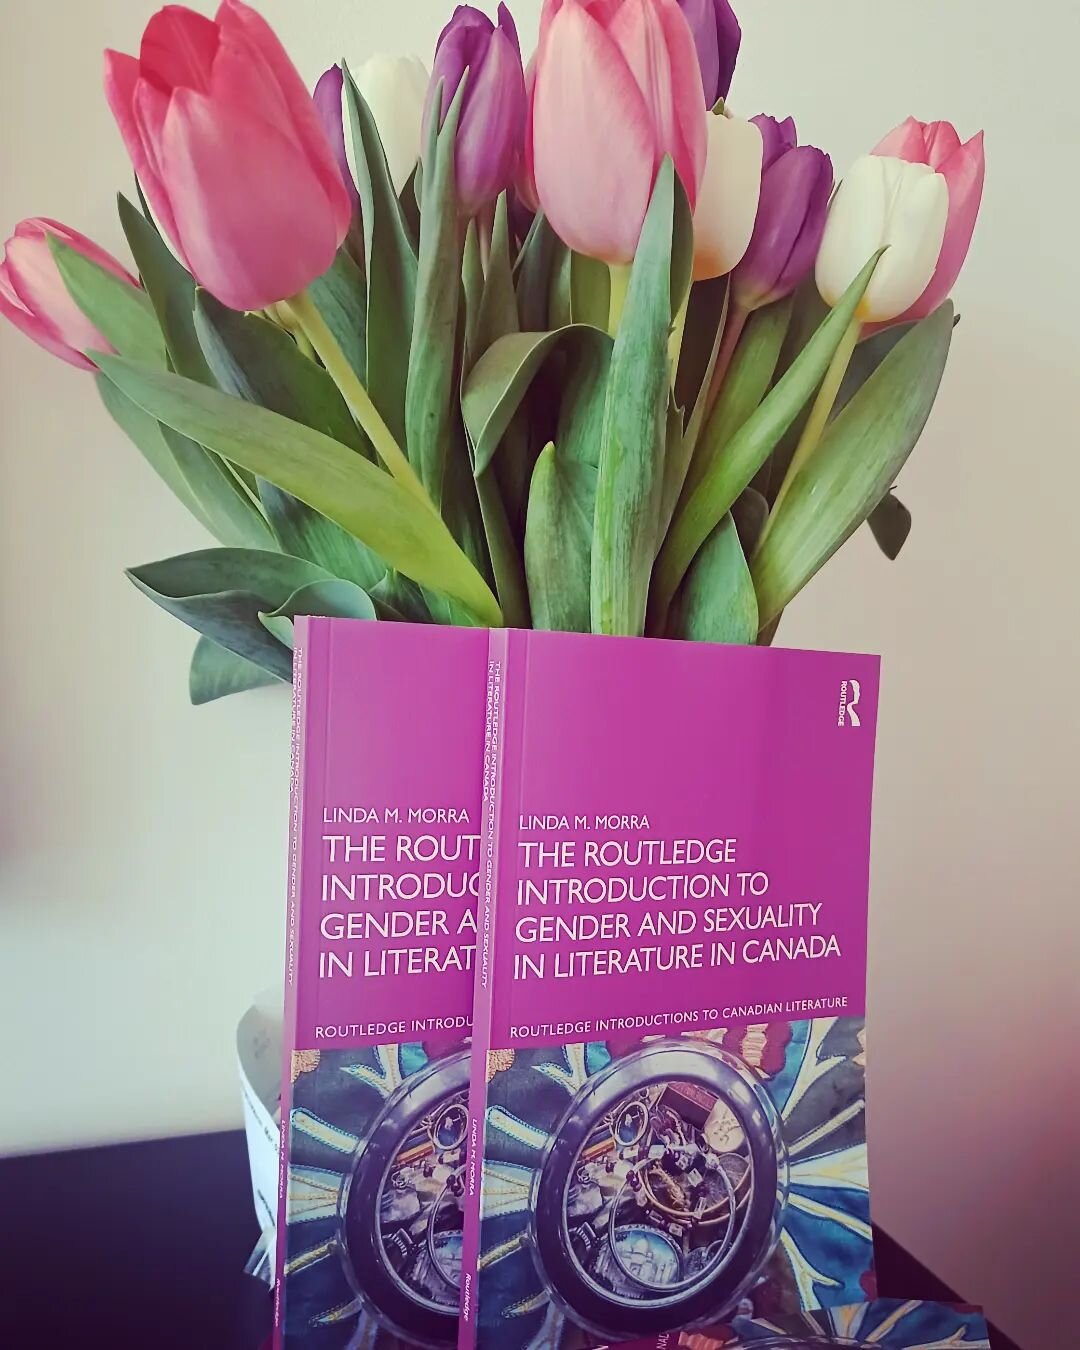 At last, the @Routledge Introduction to Gender and Sexuality in Literature in Canada is out and hot off the press, with lovely and celebratory tulips by @drjenandrews ....a big shout put to @lorraine.york.37 and @robertlecker who were mainstays as I 